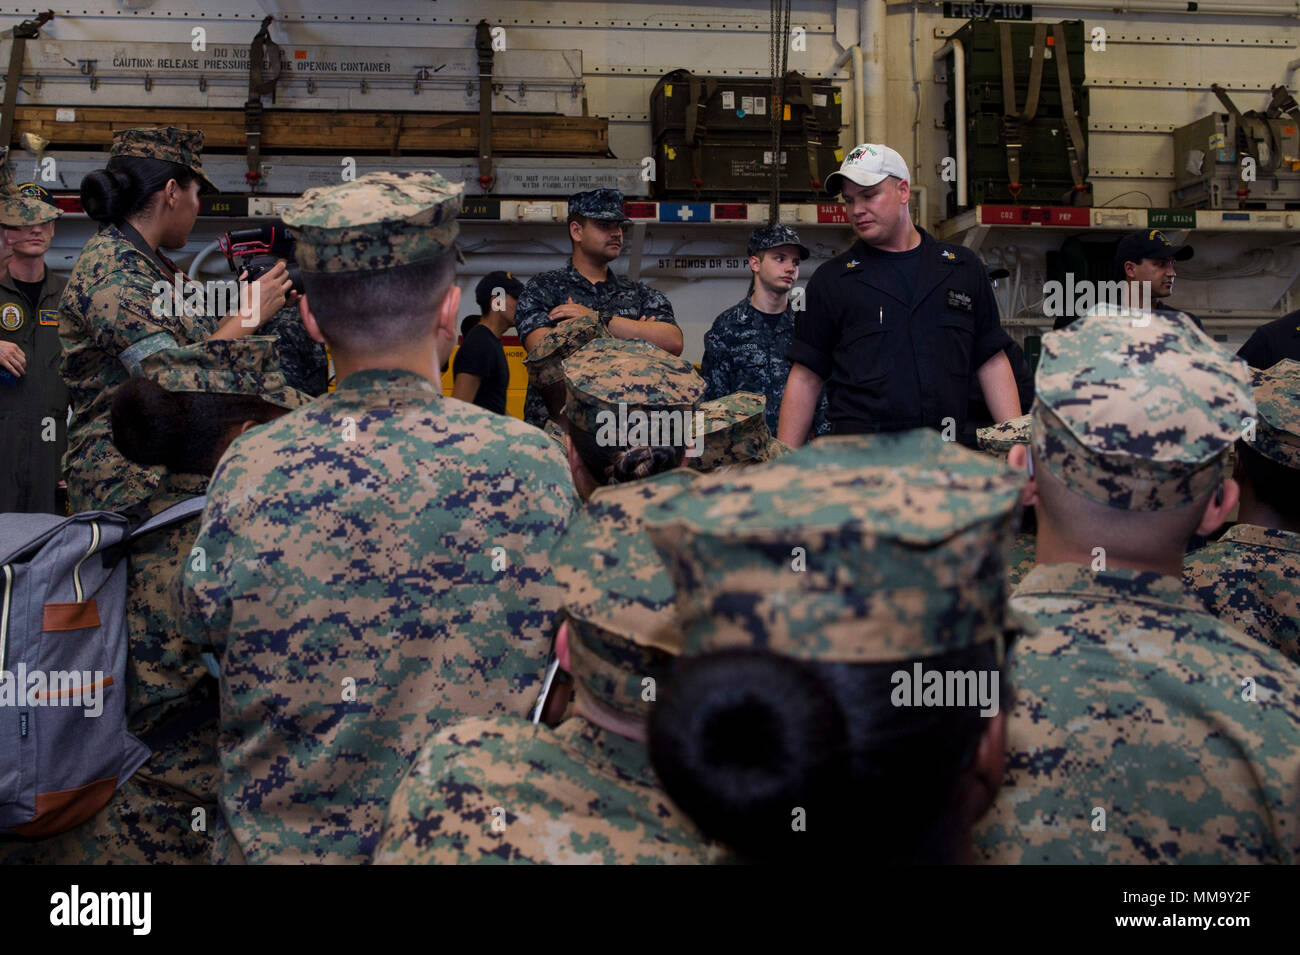 170921-N-RD713-044 WHITE BEACH, Okinawa (Sept. 21, 2017) Quartermaster 1st Class Matthew Lenerville, from Richardton, N.D., gives a safety brief to Marine Corps Junior ROTC students from Kubasaki High School during a tour of the amphibious assault ship USS Bonhomme Richard (LHD 6). Bonhomme Richard, flagship of the Bonhomme Richard Amphibious Ready Group, is operating in the Indo-Asia-Pacific region to enhance partnerships and be a ready-response force for any type of contingency. (U.S. Navy photo by Mass Communication Specialist 3rd Class Zachary DiPadova/Released) Stock Photo